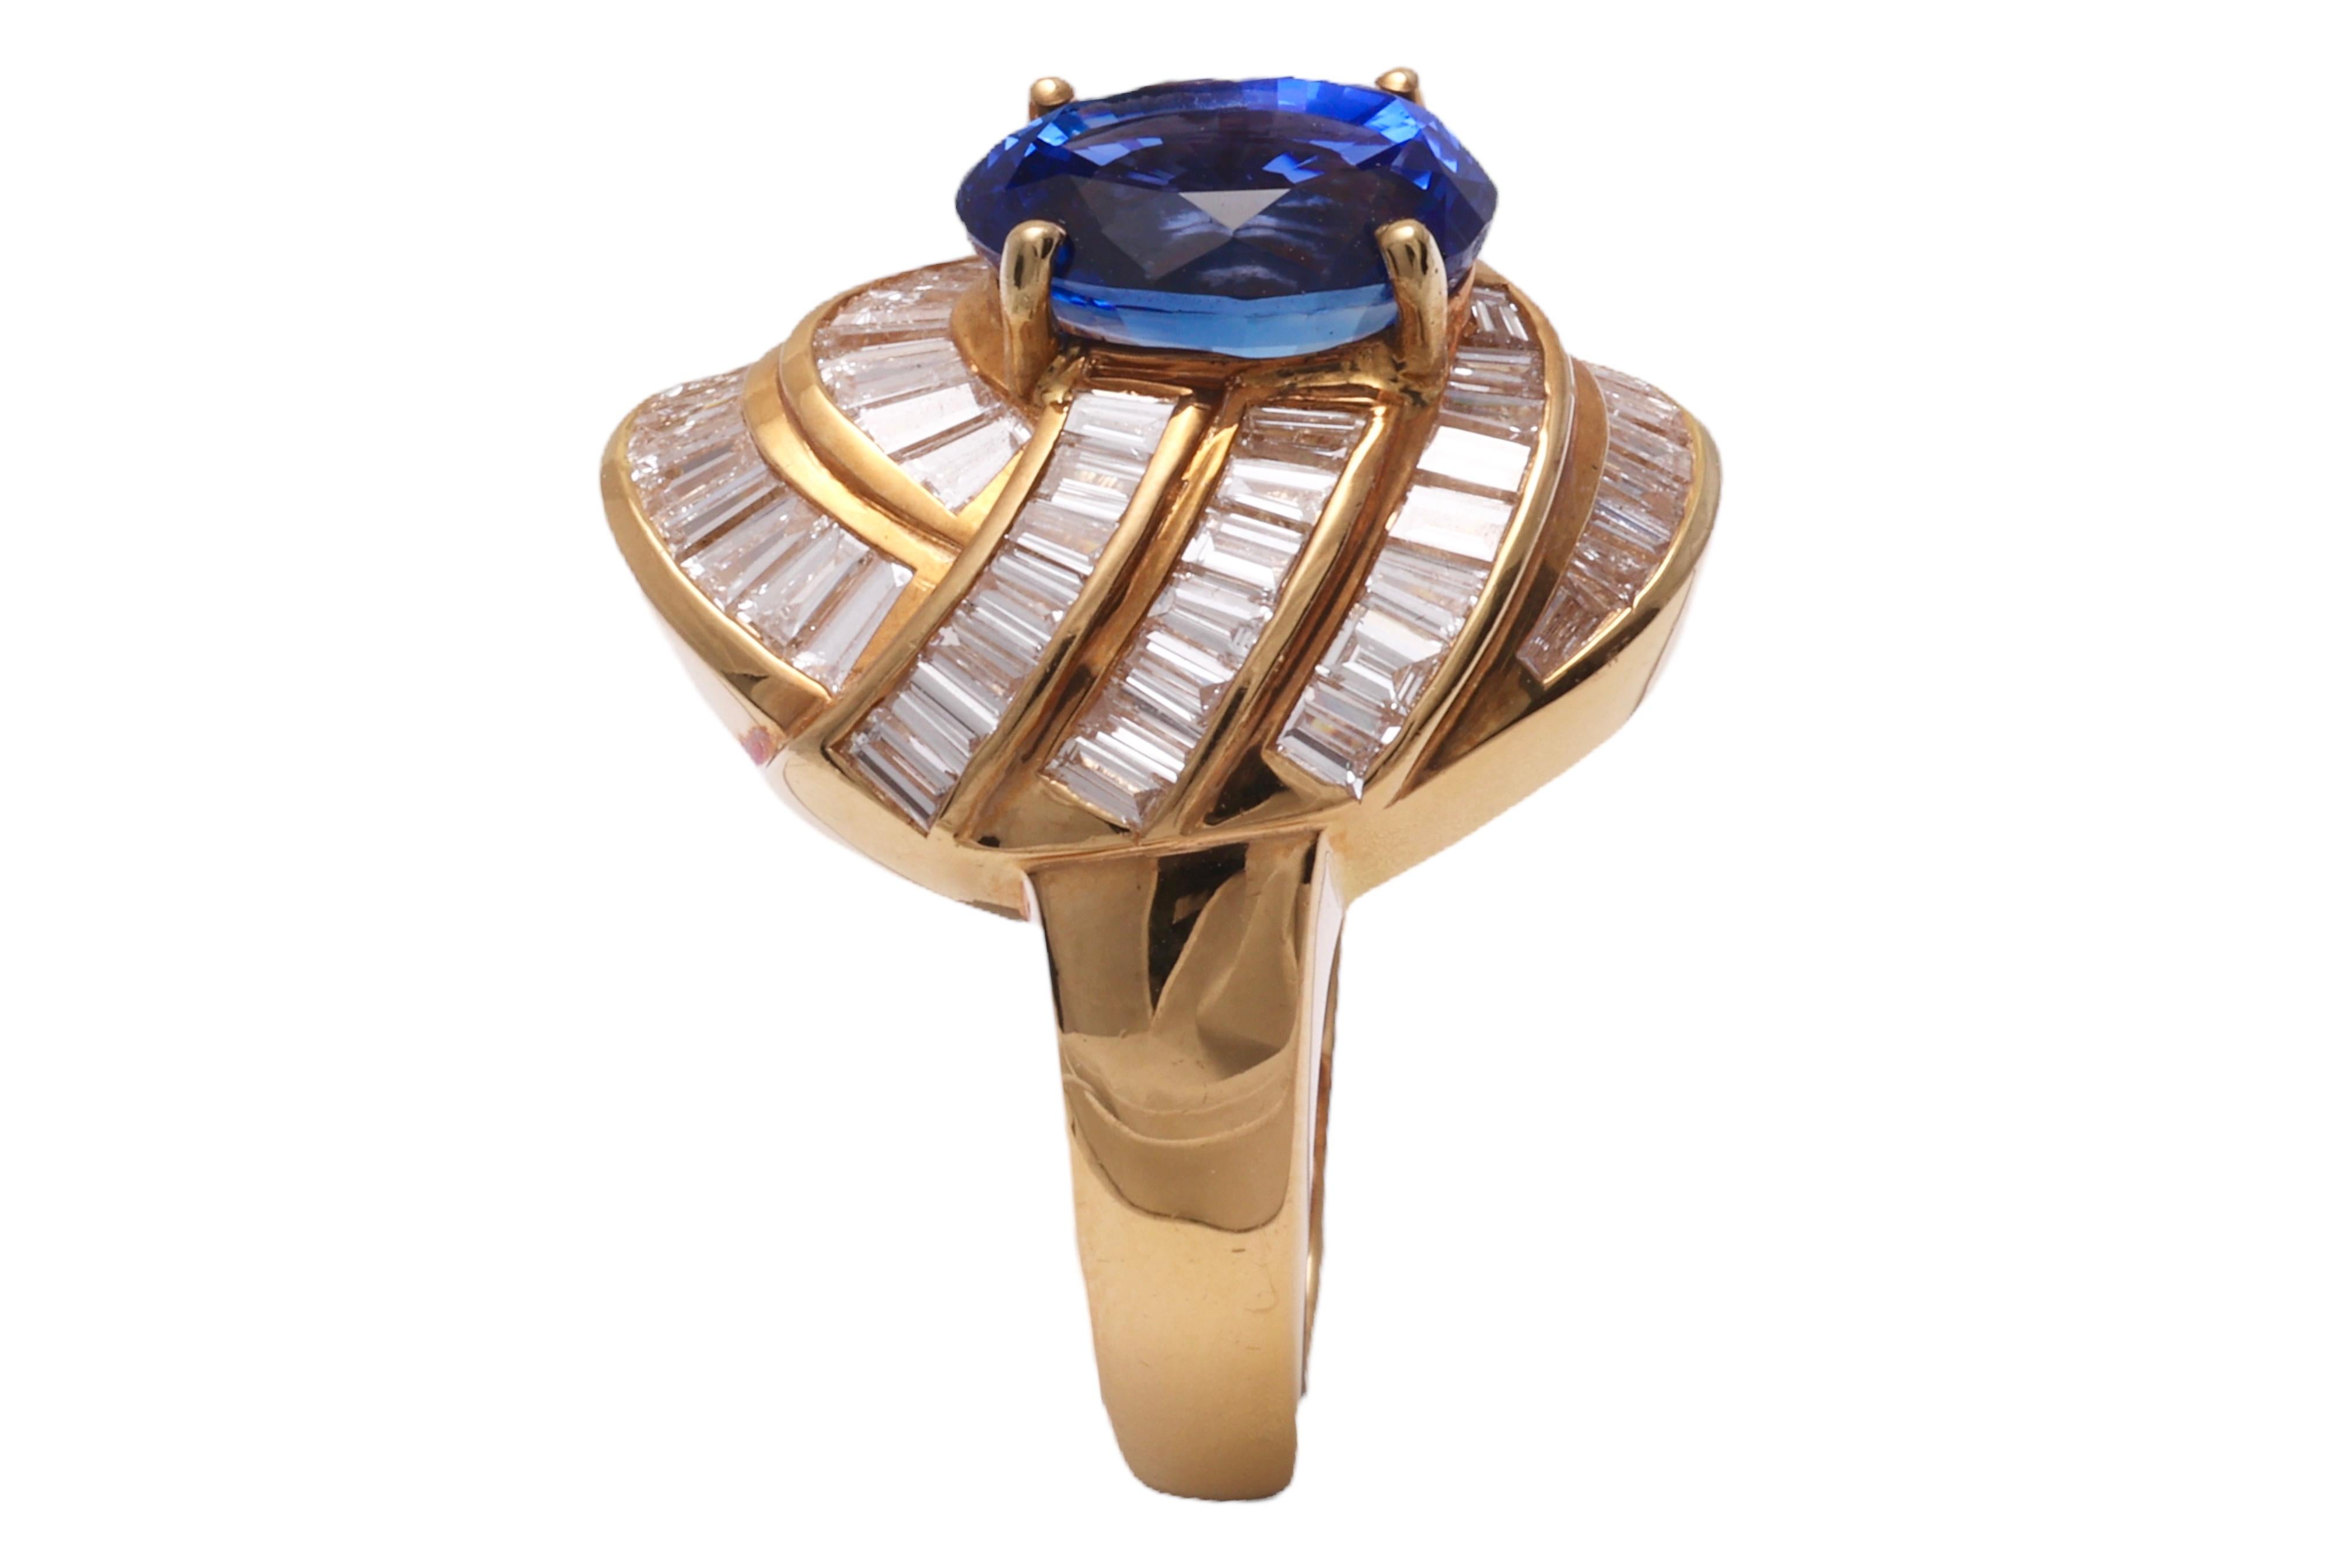  18 kt. Gold Ring With Ceylon Sapphire & Baguette Cut Diamonds For Sale 2